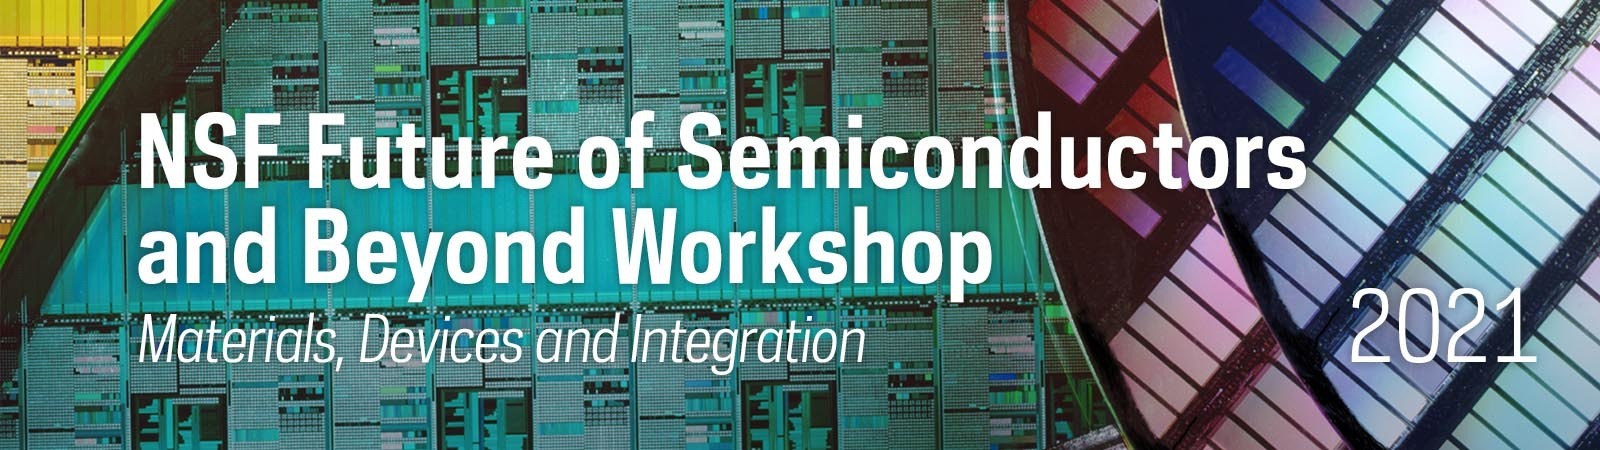 NSF Future of Semiconductors and Beyond Workshop 2021 - Materials, Devices and Integration